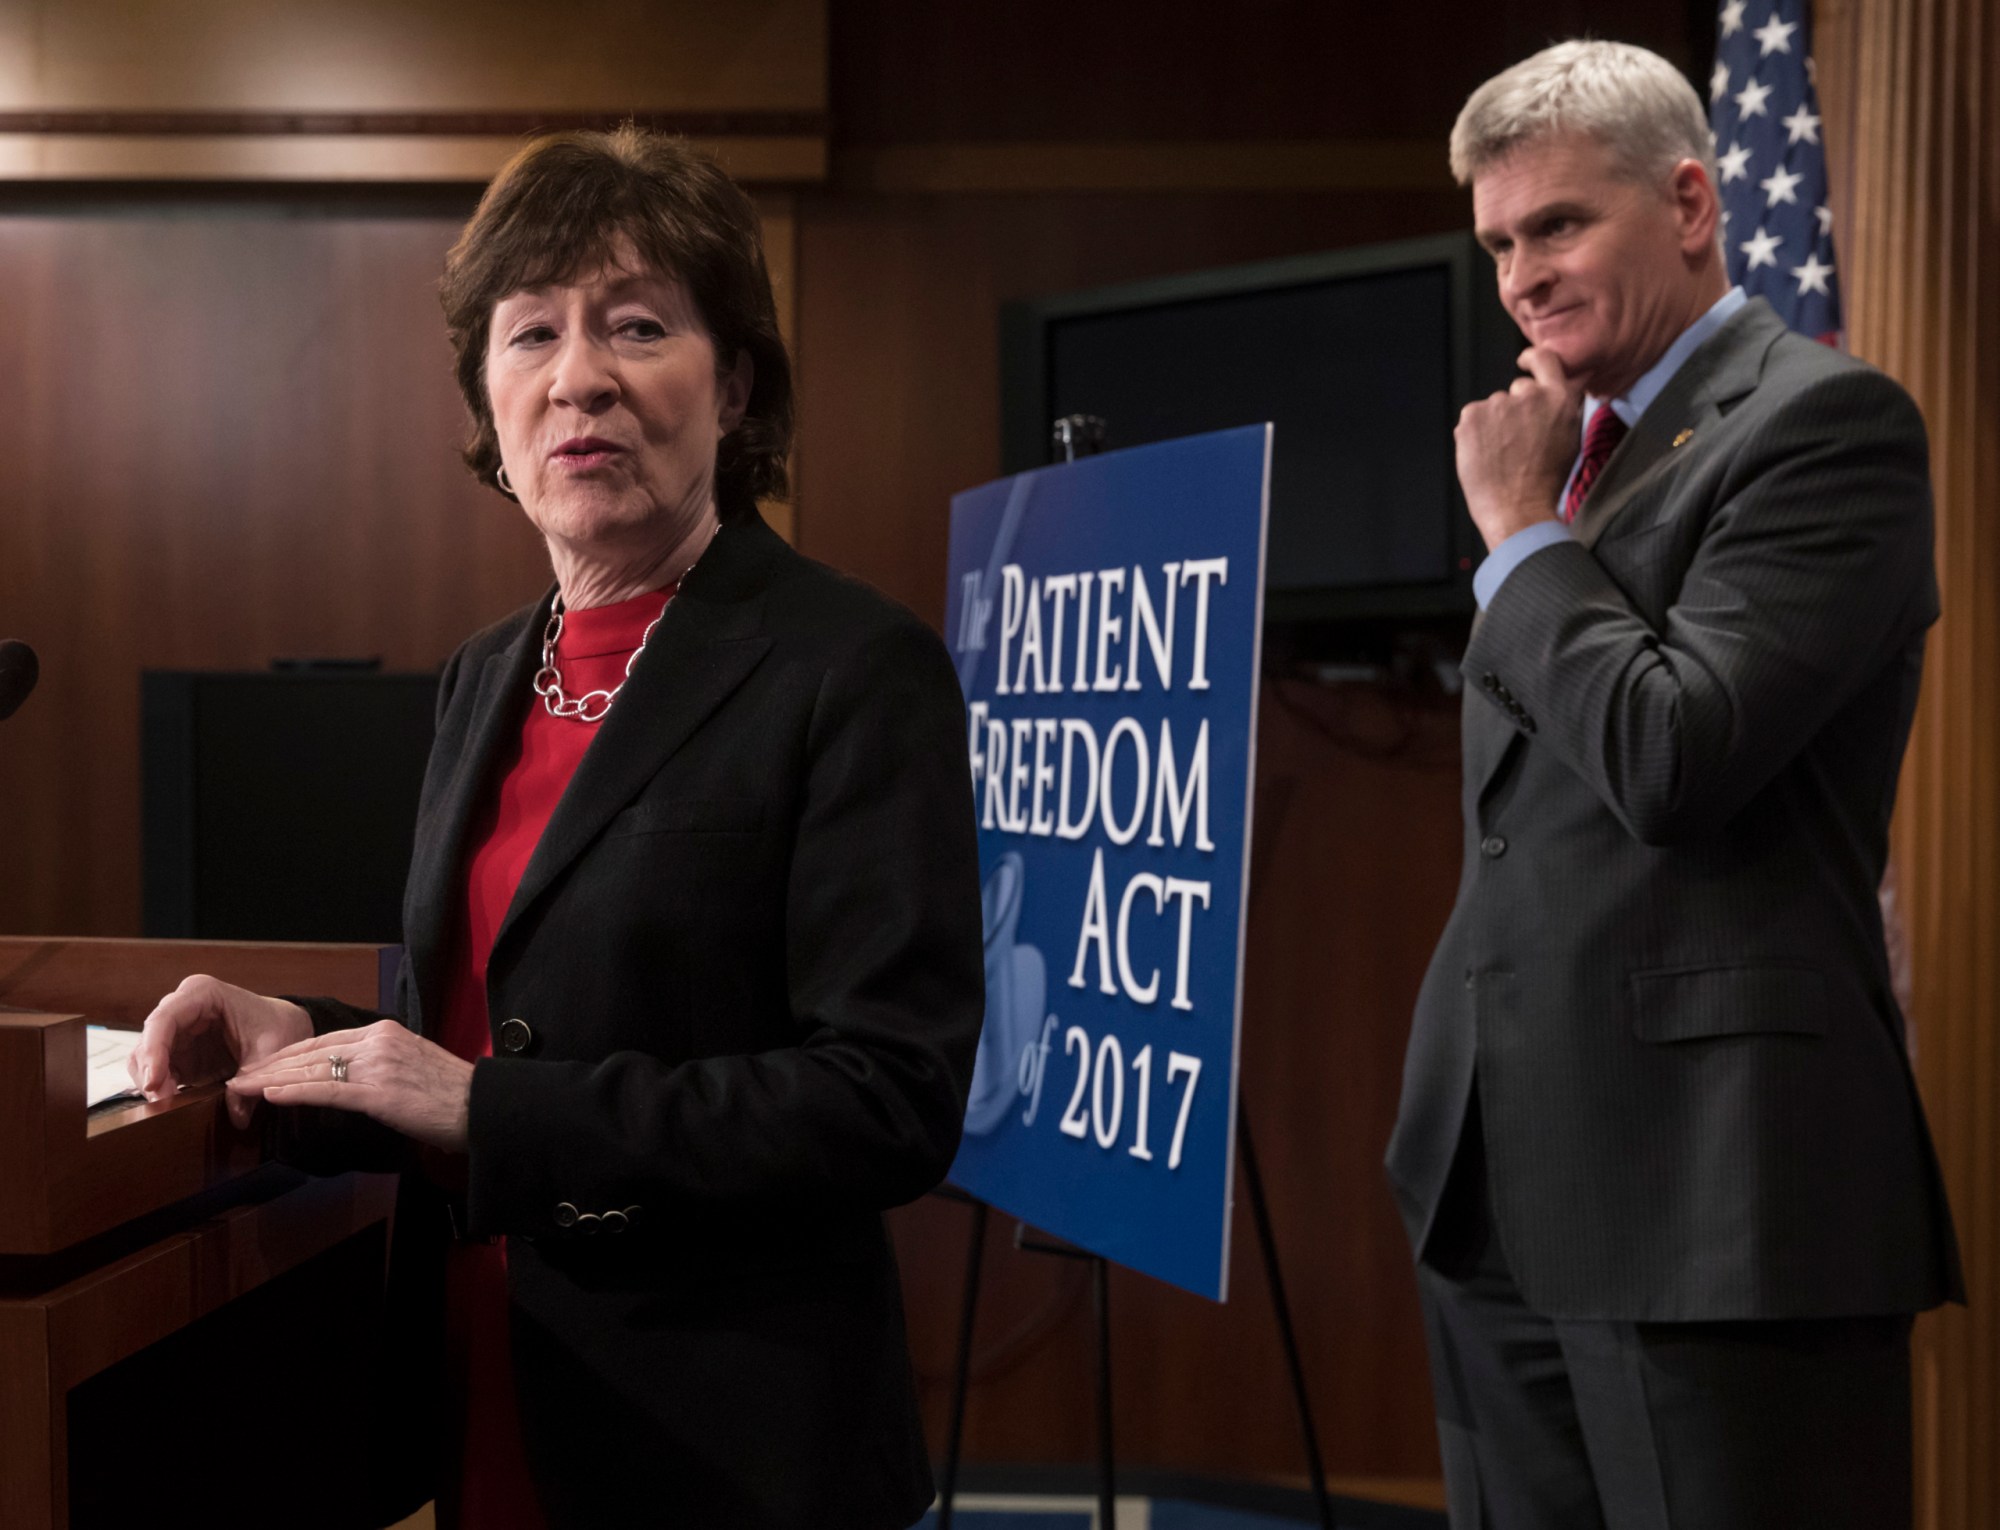 Sen. Susan Collins (R-ME) accompanied by Sen. Bill Cassidy (R-LA), speaks during a news conference on Capitol Hill in Washington, January 23, 2017, to announce the Patient Freedom Act of 2017. ((AP/J. Scott Applewhite))